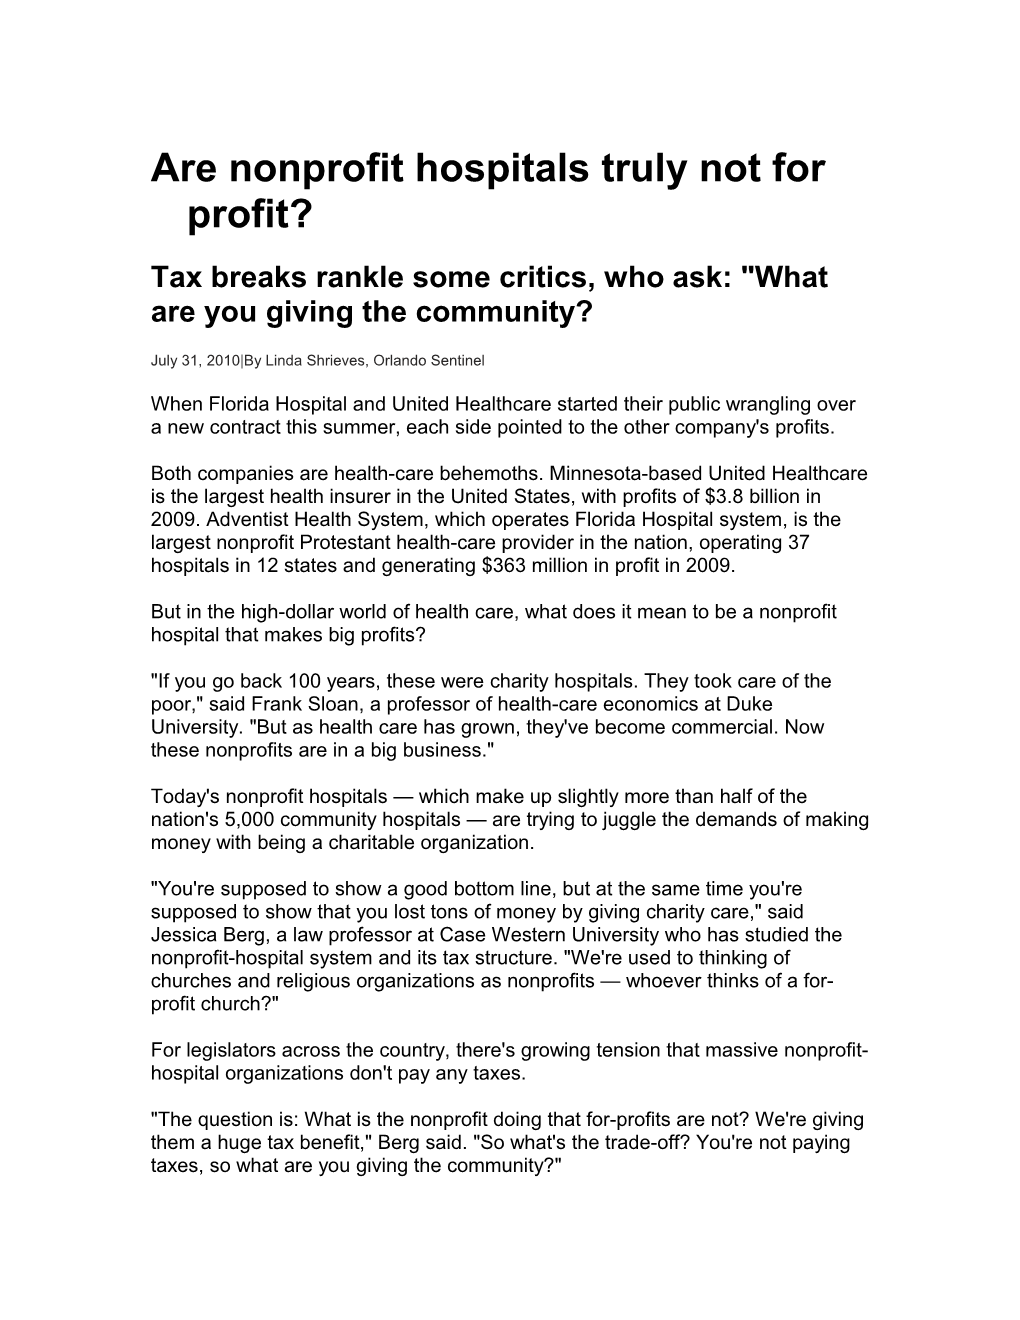 Are Nonprofit Hospitals Truly Not for Profit